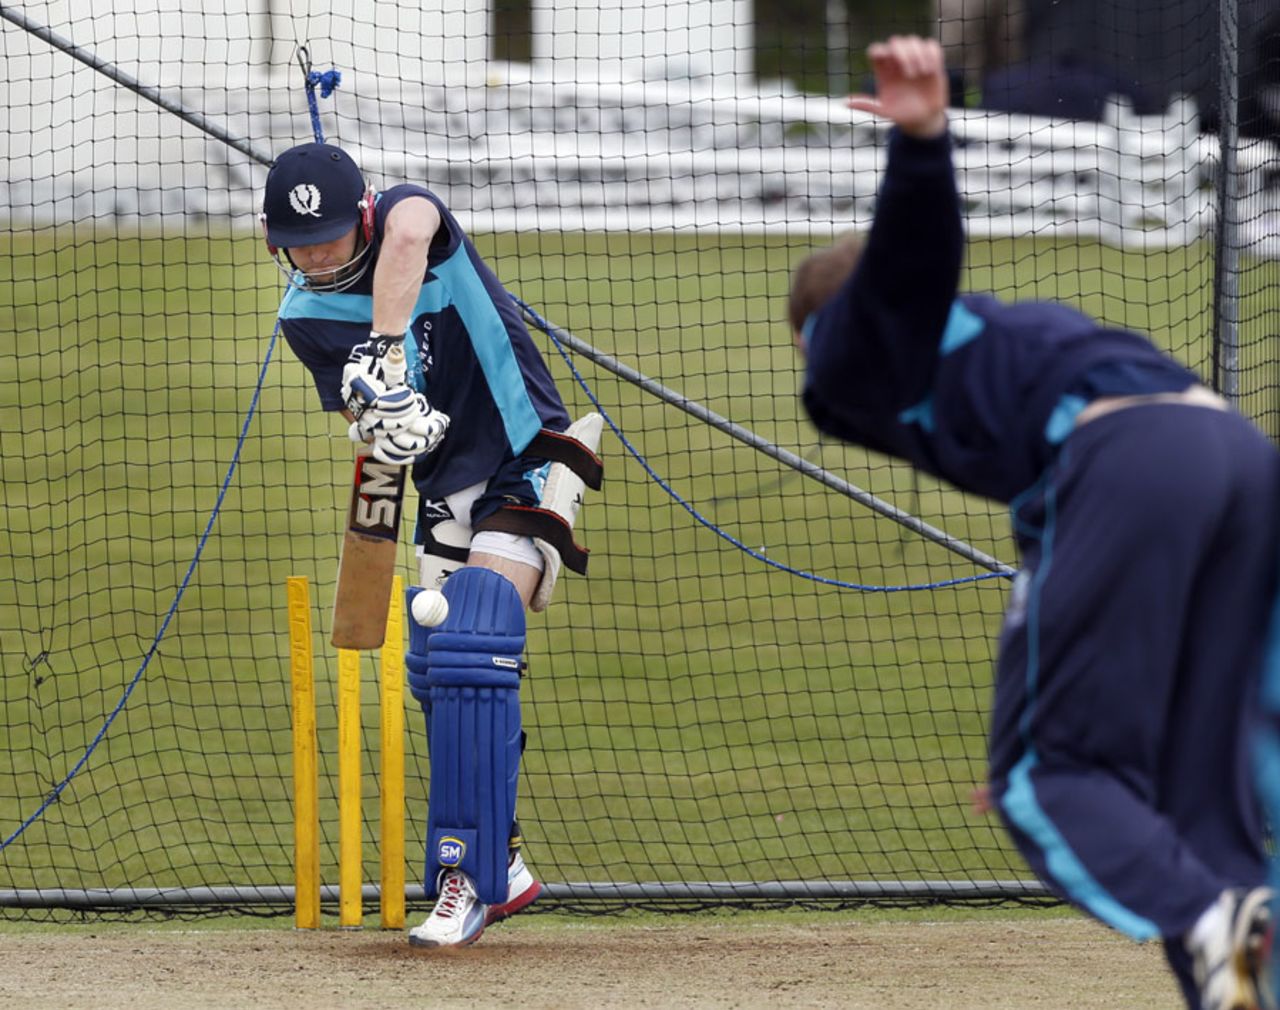 Preston Mommsen bats during a Scotland net session at Mannofield Park, Scotland v England, only ODI, Aberdeen, May 8, 2014